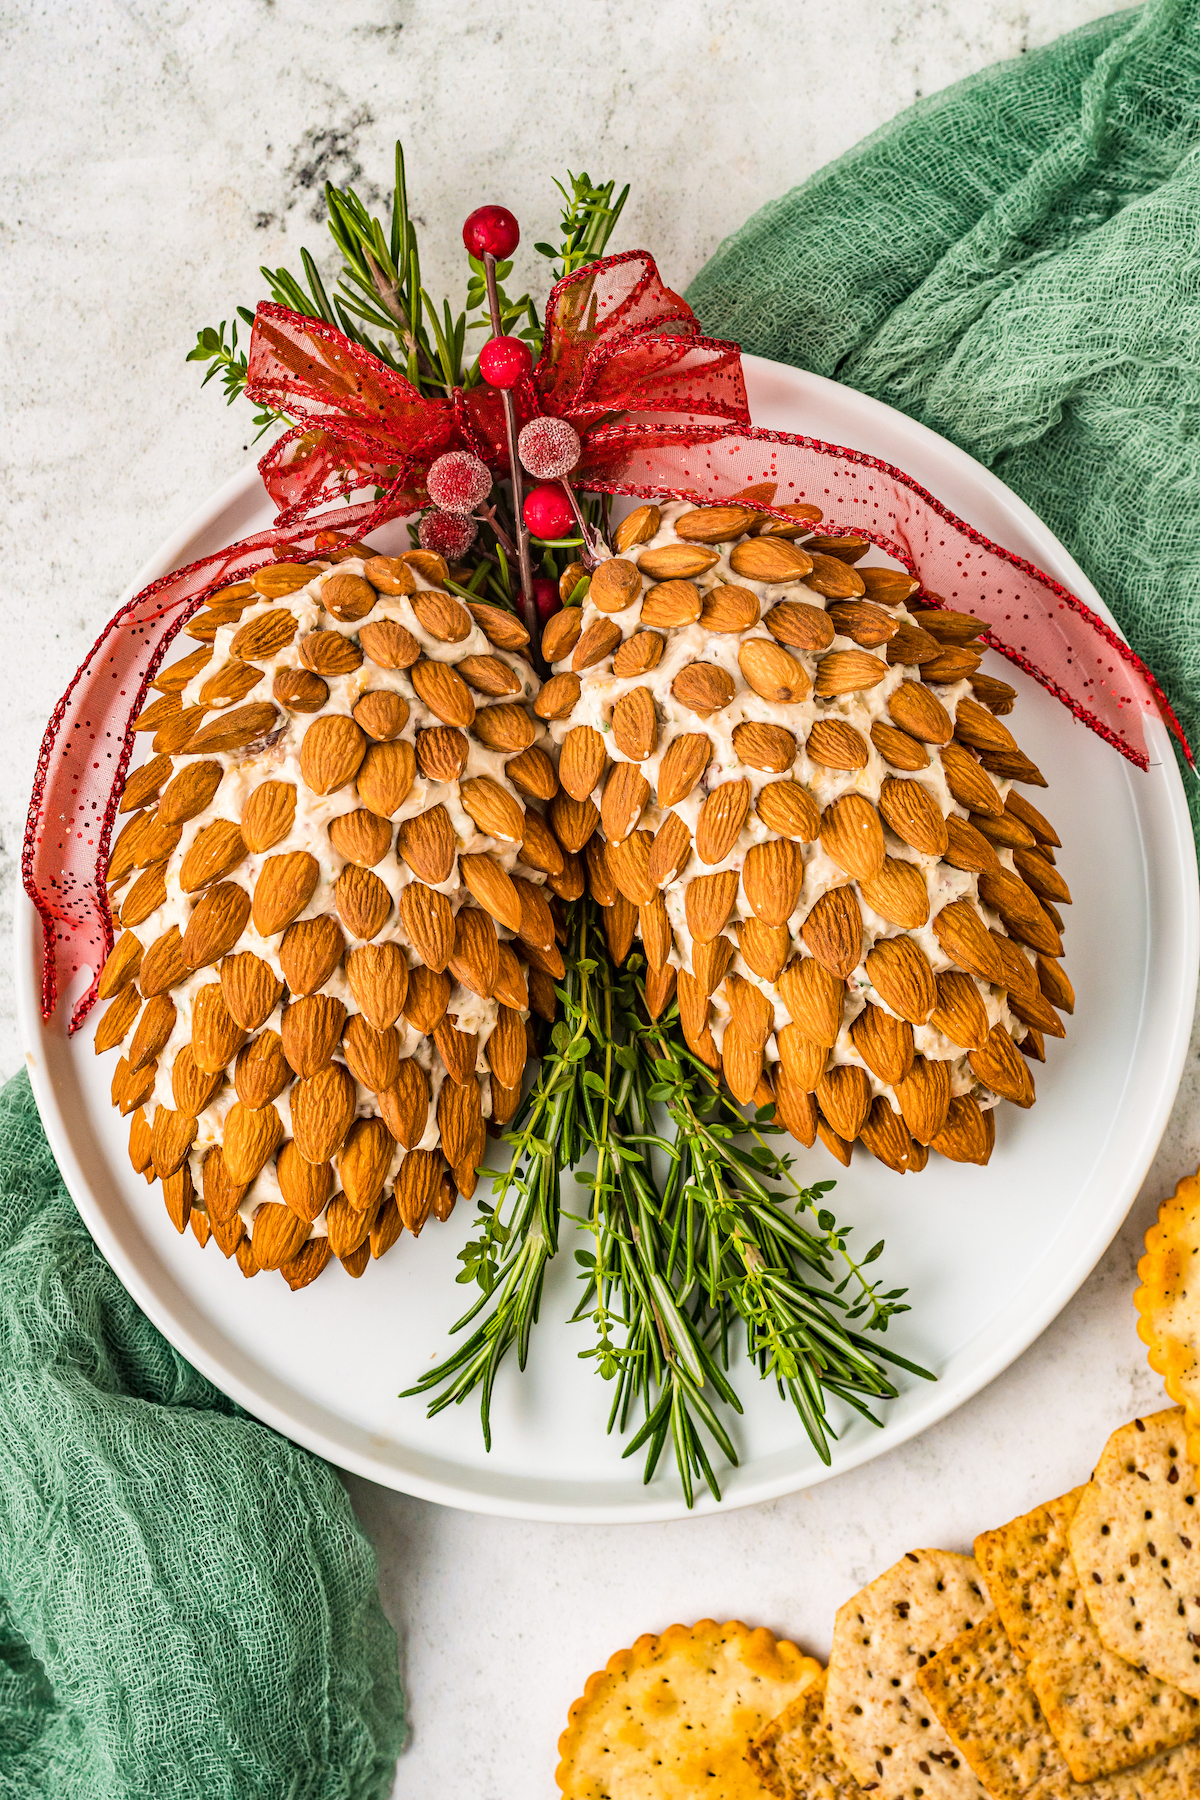 Pine cone cheese balls on a platter, garnished with herbs, ribbons, and cranberries.